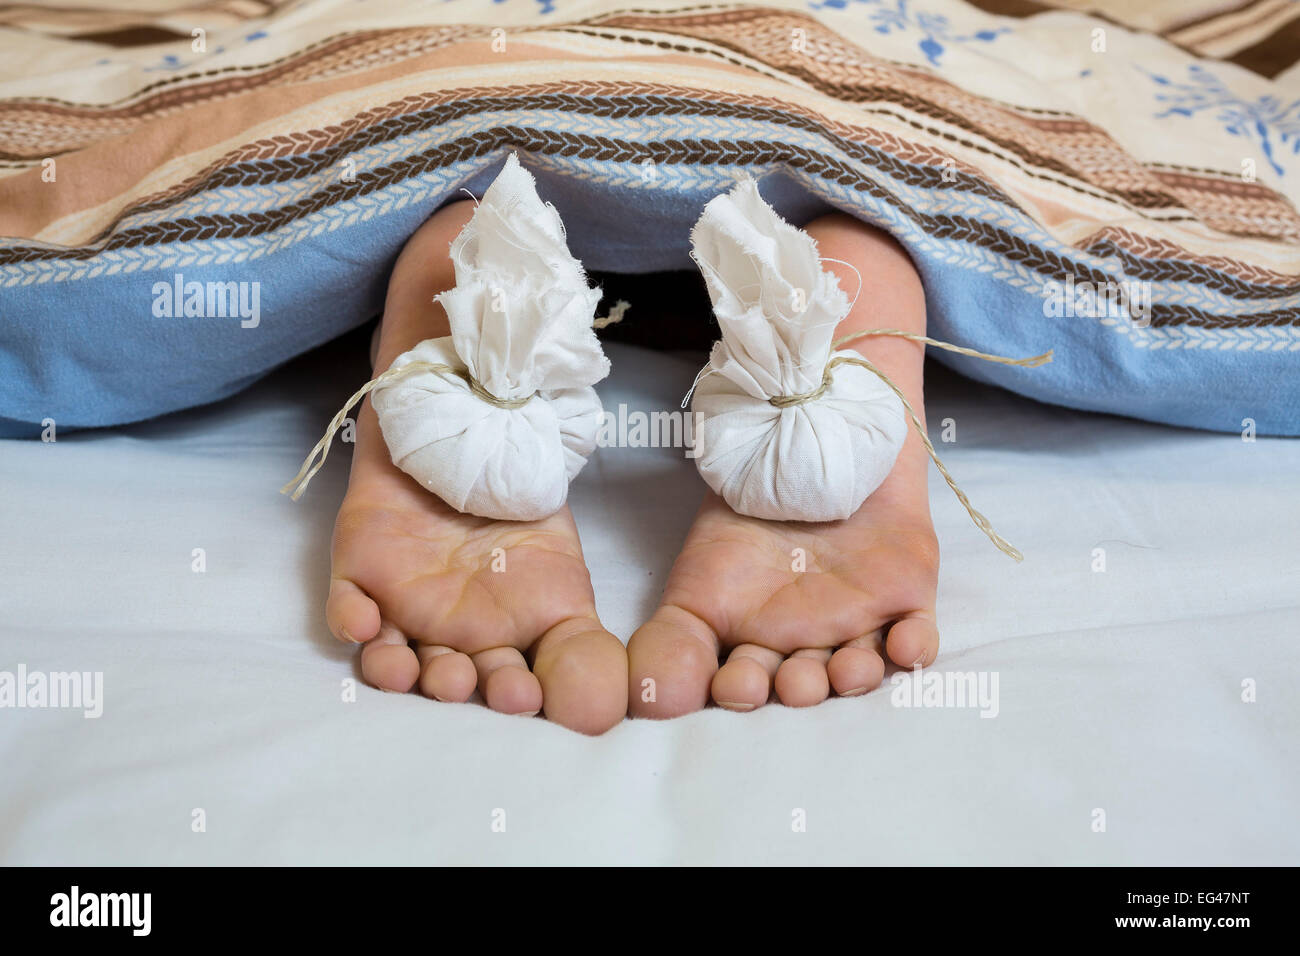 Onion bags on feet, looking out from under a blanket Stock Photo